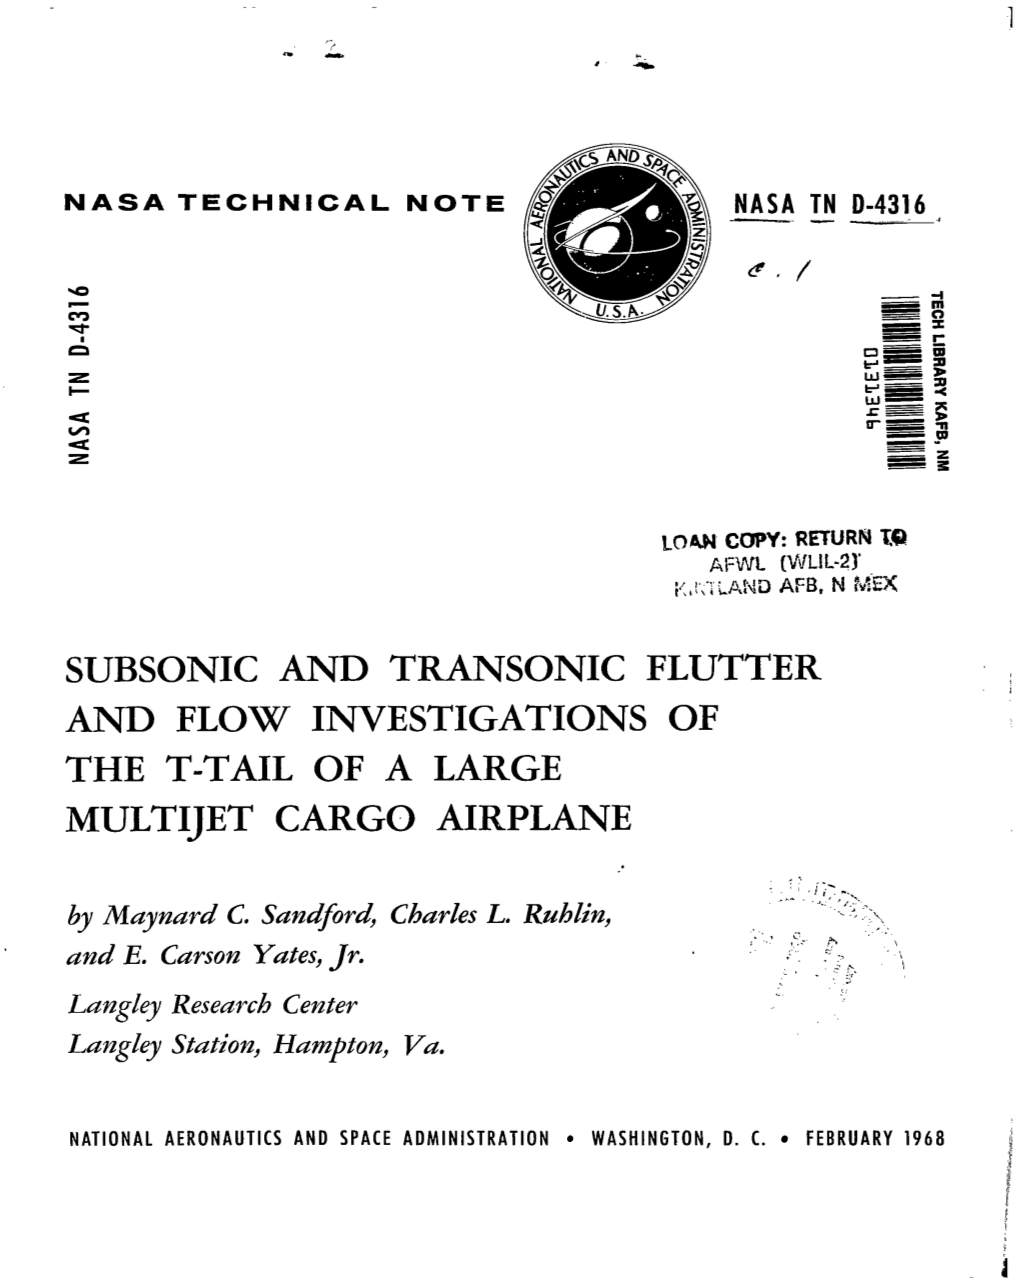 Subsonic and Transonic Flutter and Flow Investigations of the T-Tail of a Large Multijet Cargo Airplane